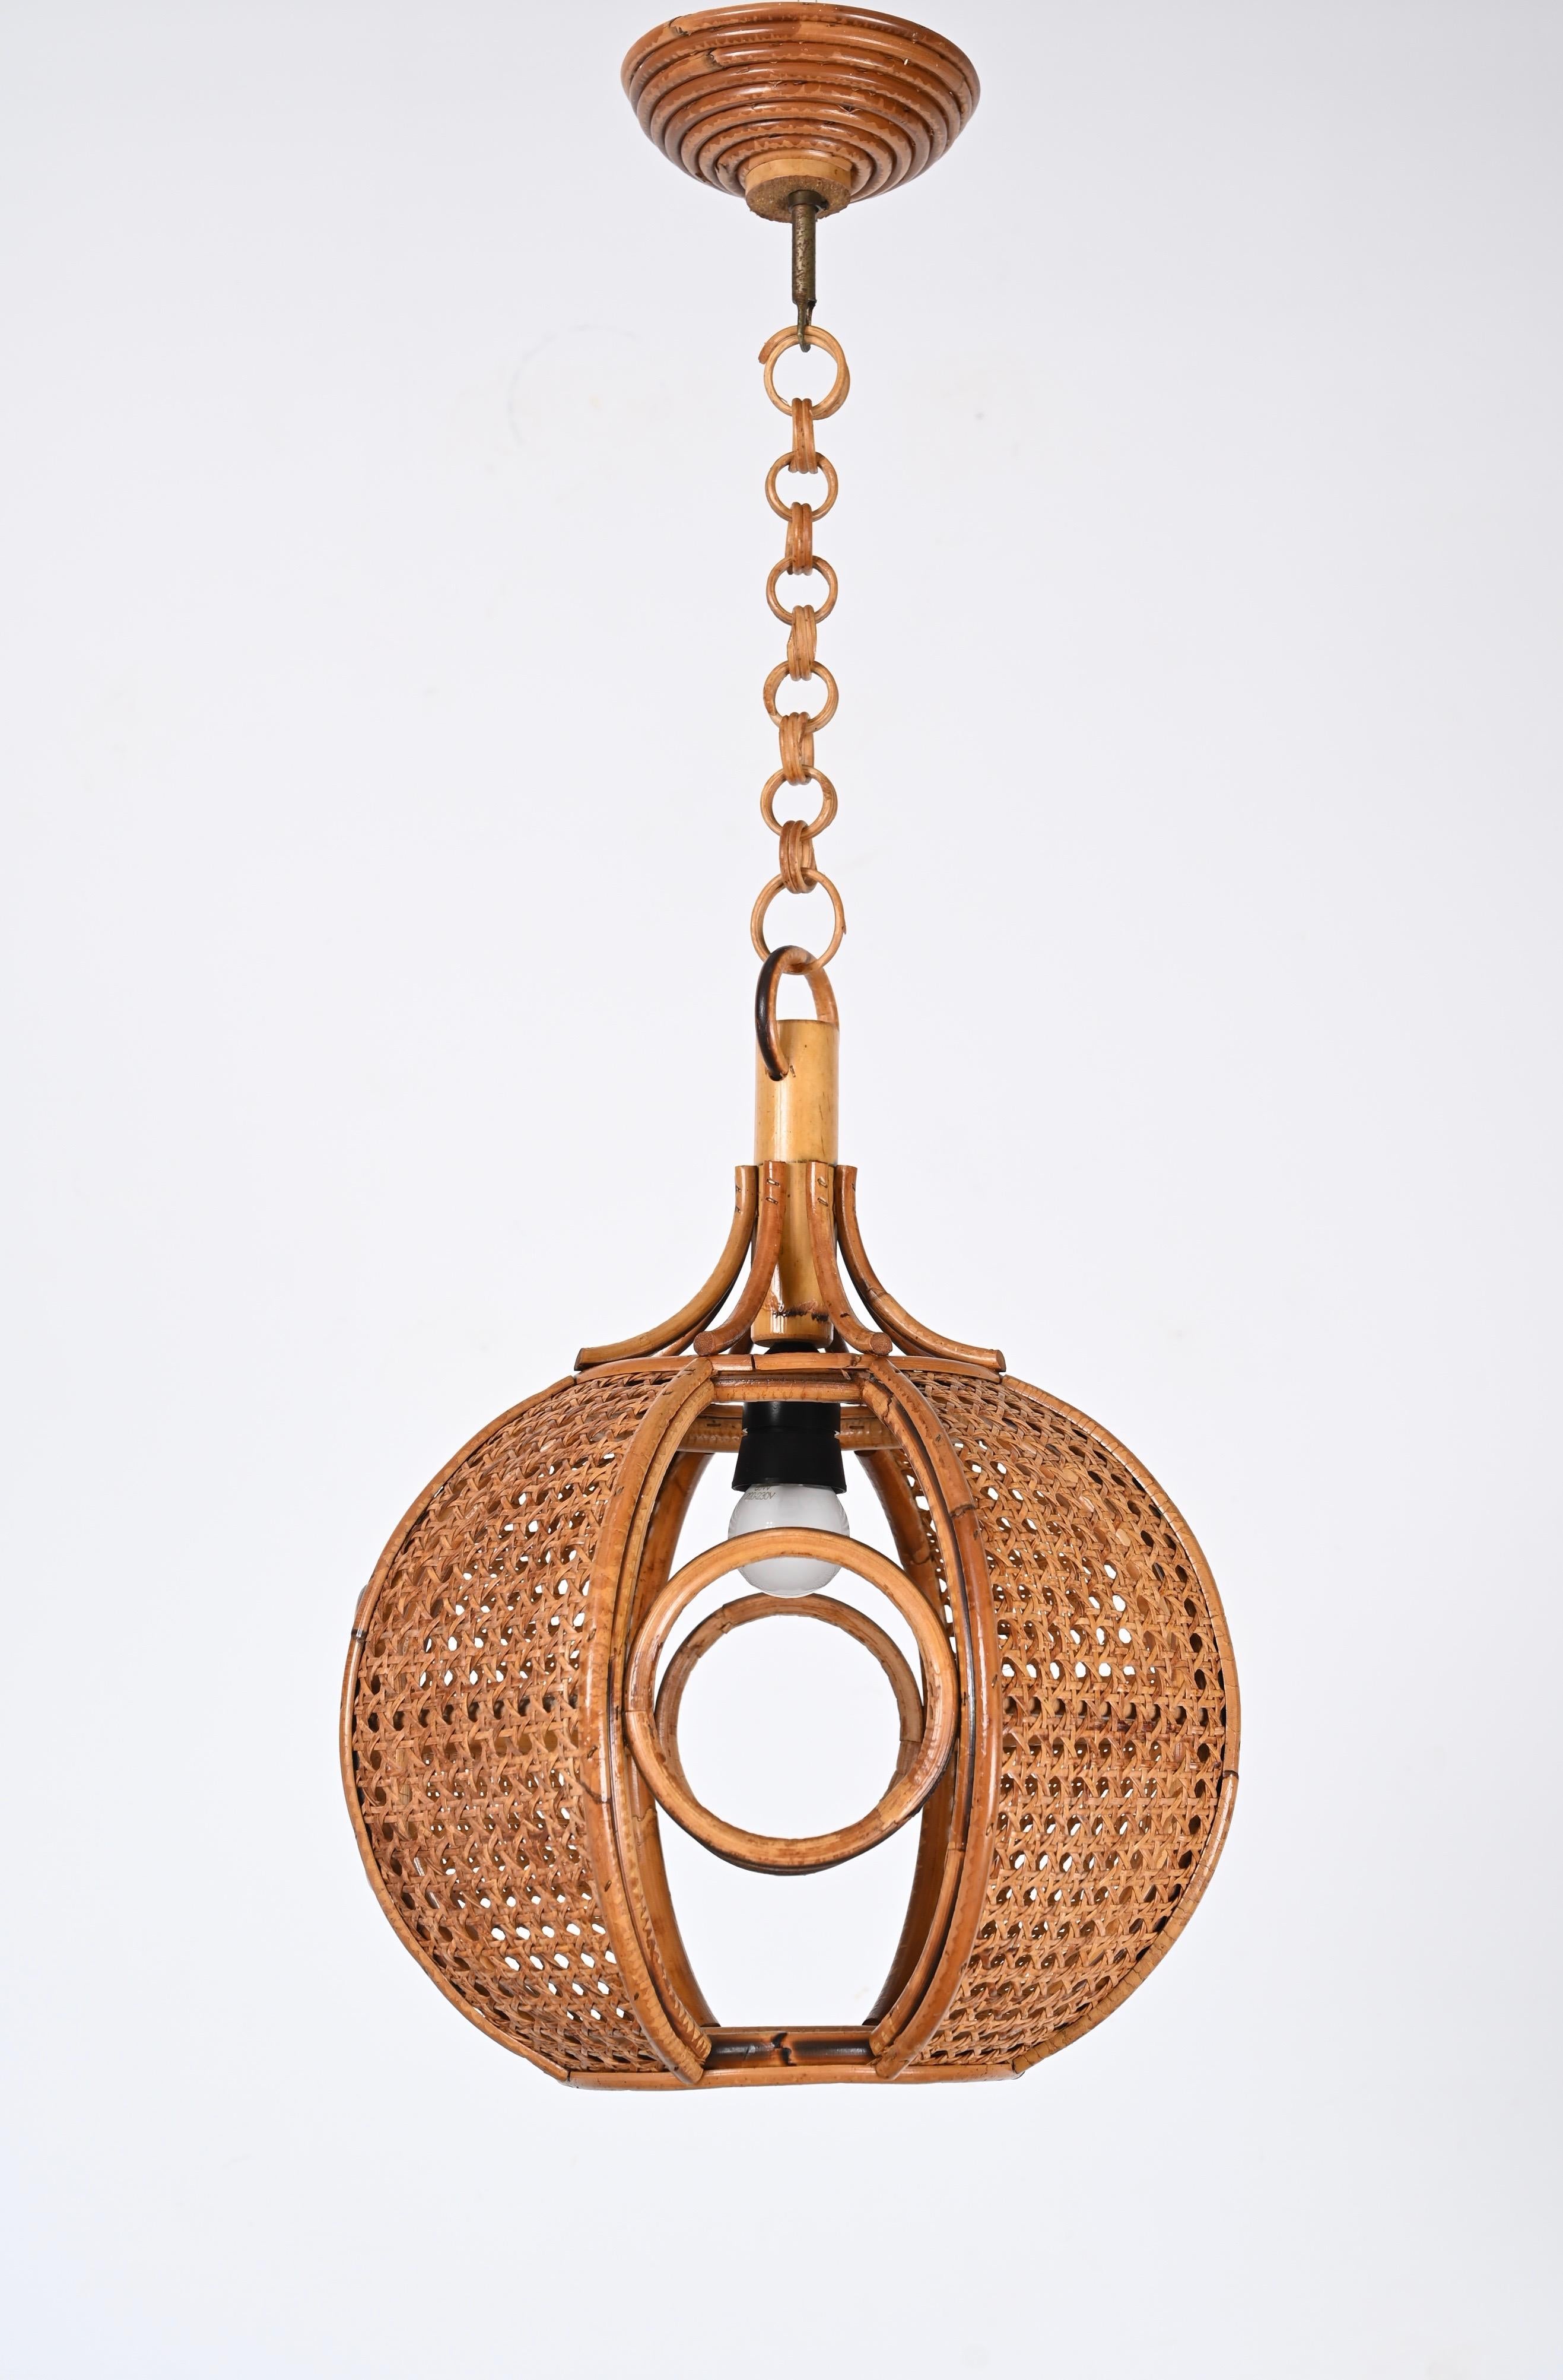 Midcentury French Riviera Chapel Rattan and Wicker Italian Chandelier, 1960s For Sale 1